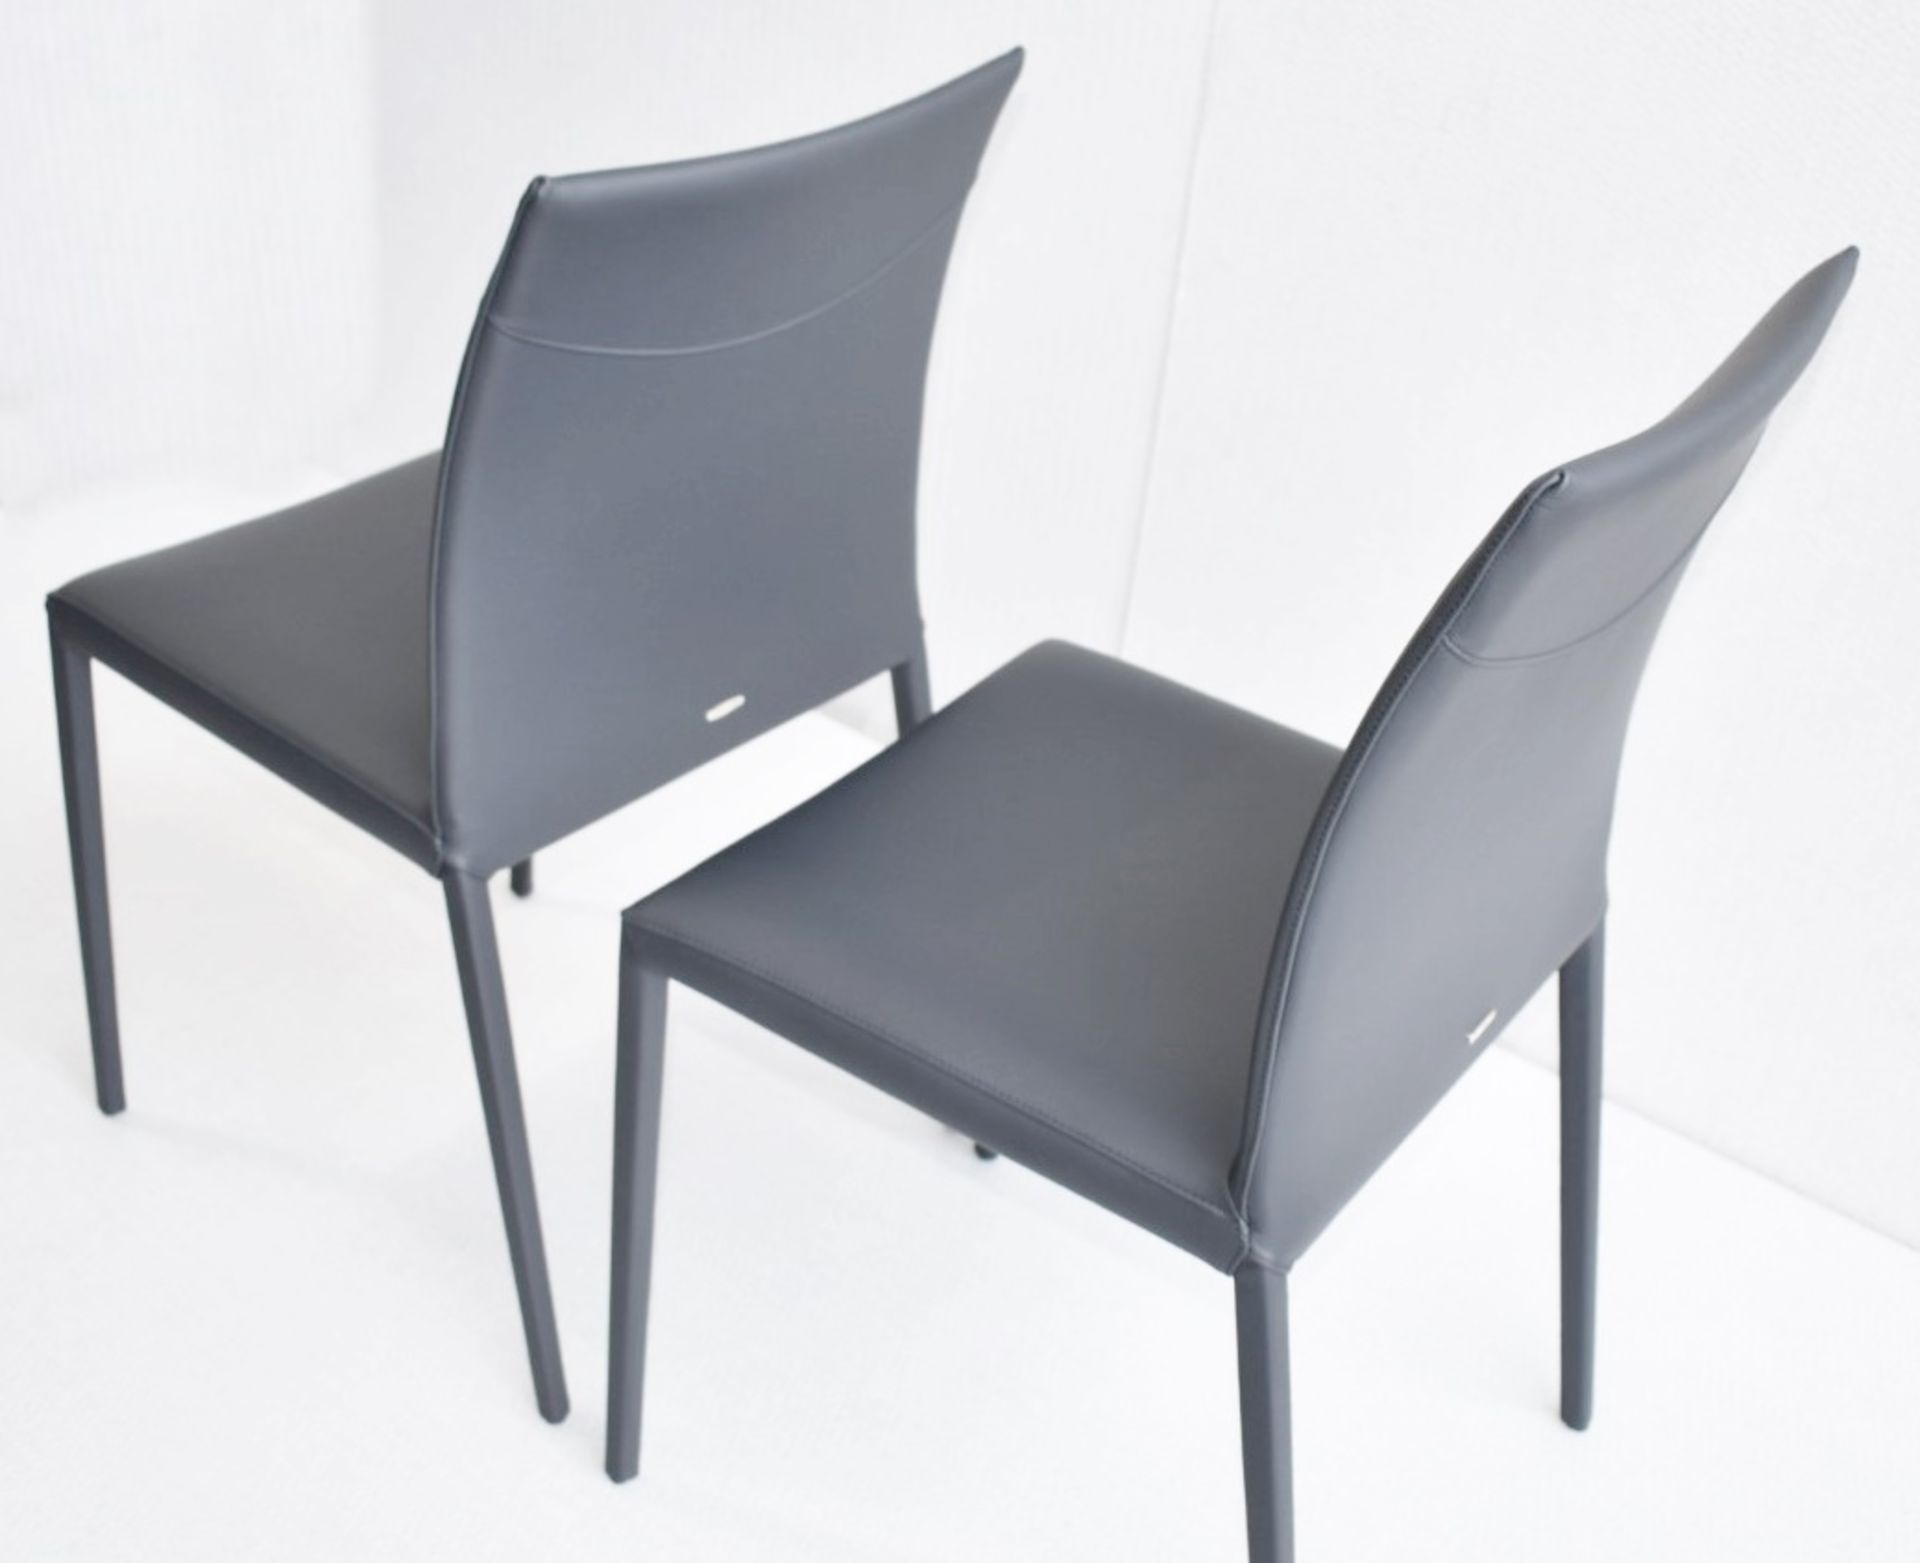 Pair of CATTELAN ITALIA Norma Designer Leather Upholstered Dining Chairs - Original Price £1,258 - Image 4 of 5